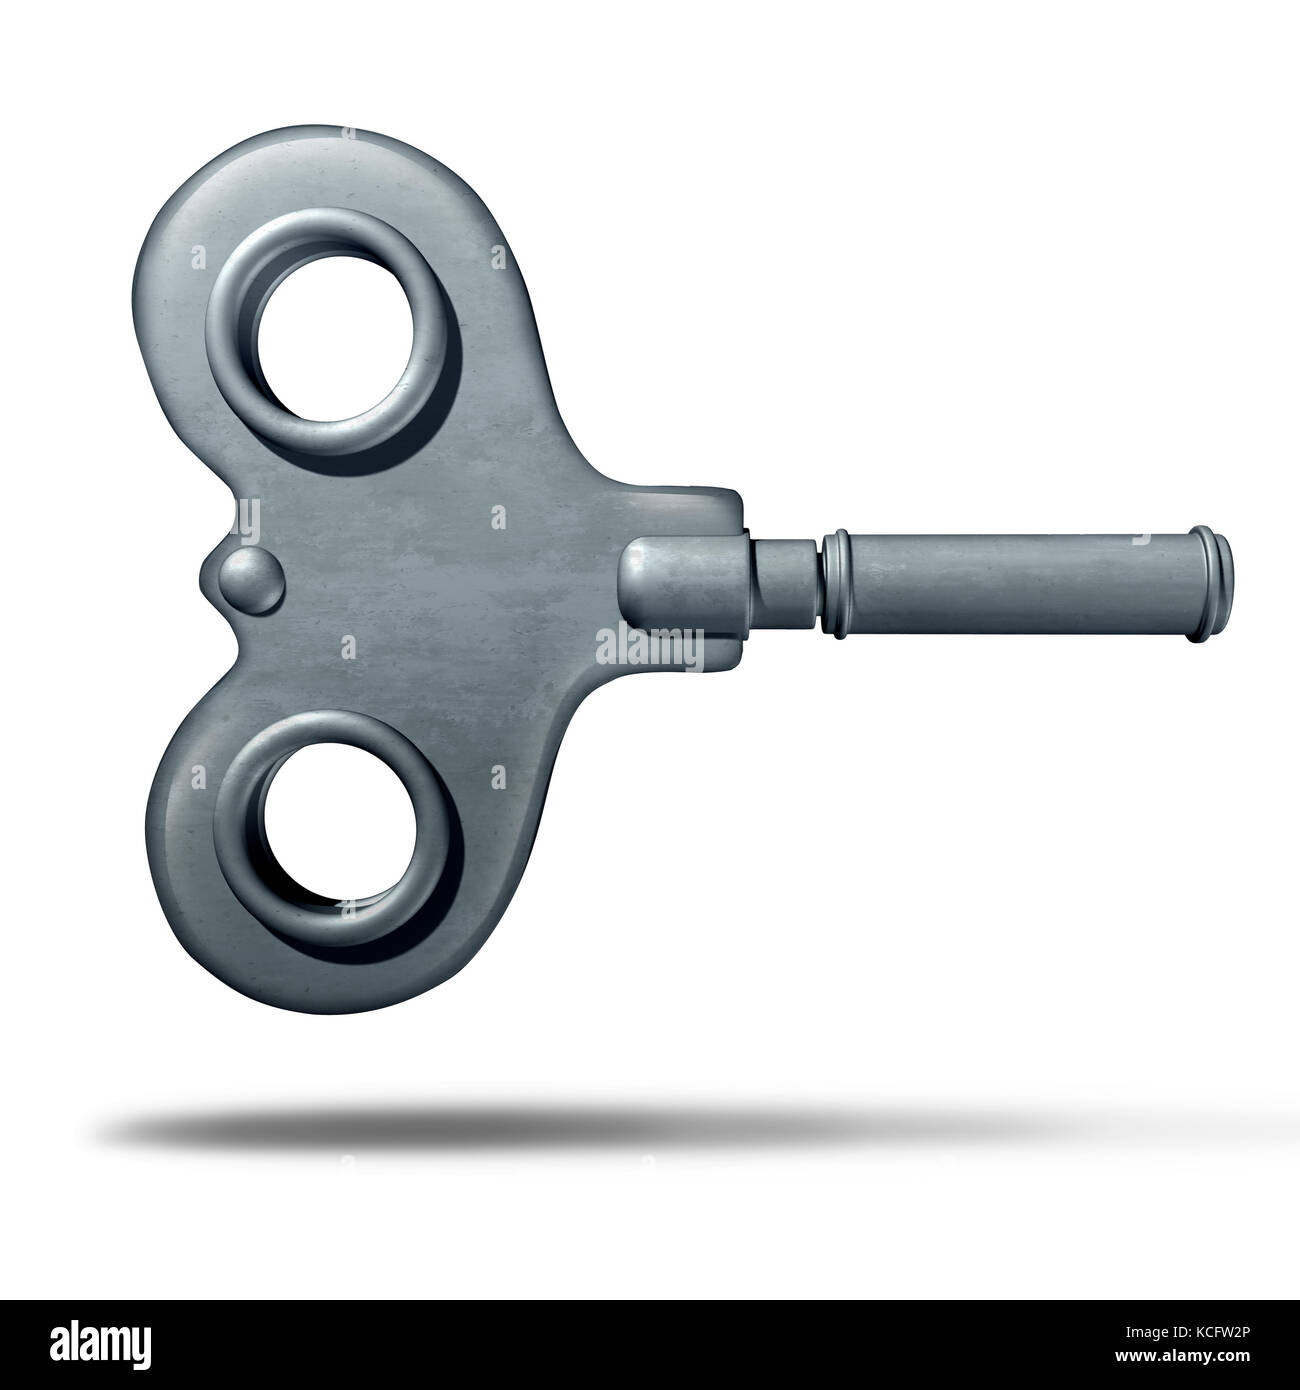 Winding key object as a classic windup toy or clock mechanism on a white background as a 3D illustration. Stock Photo